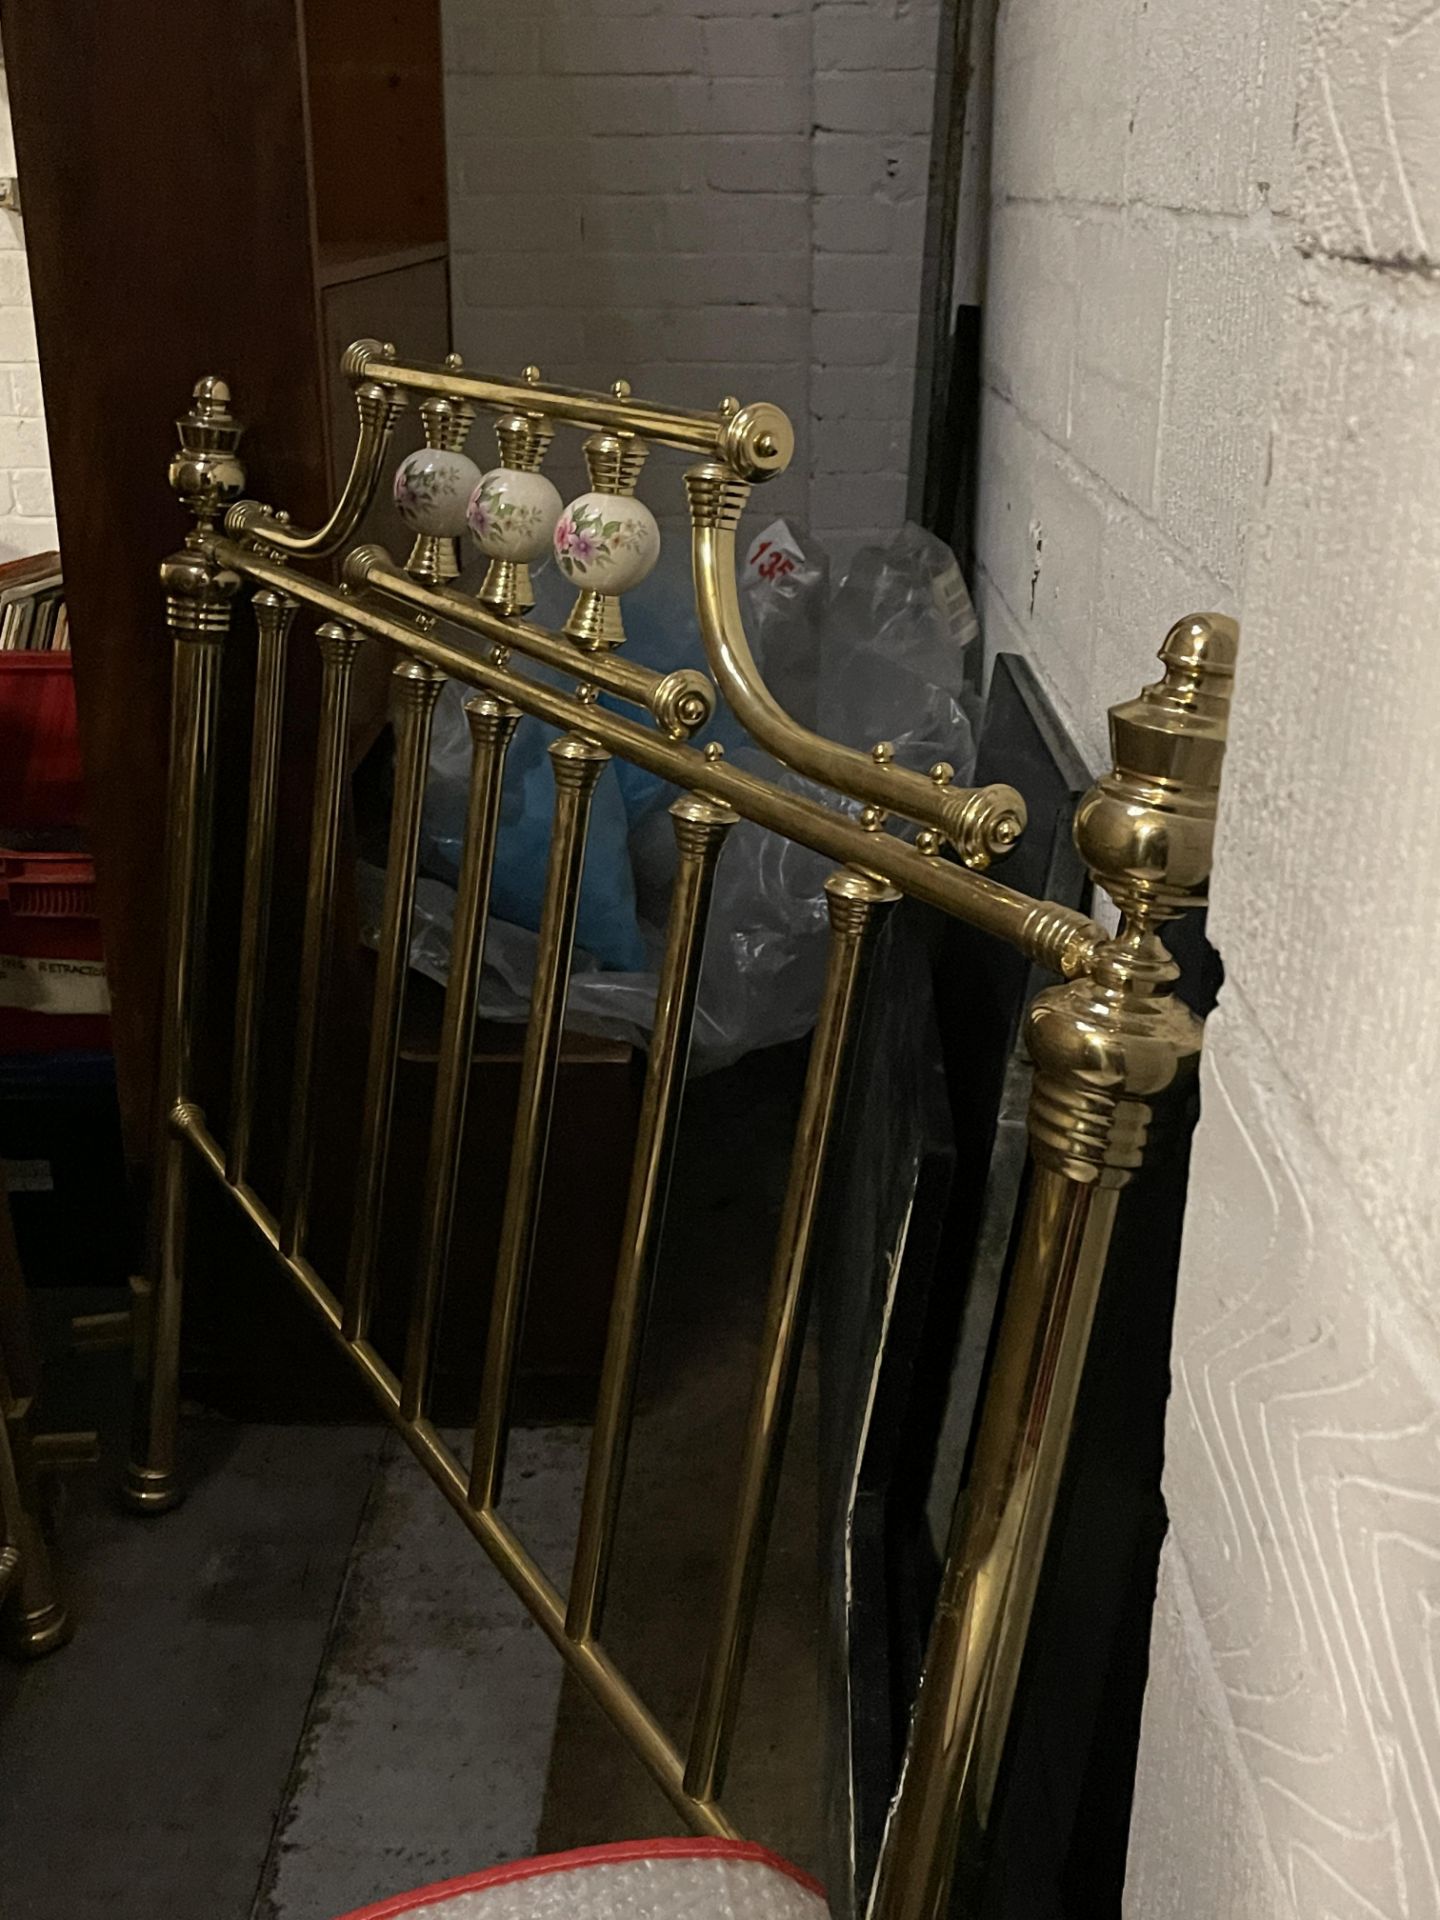 Brass double bed frame very old unclaimed property - Image 8 of 8